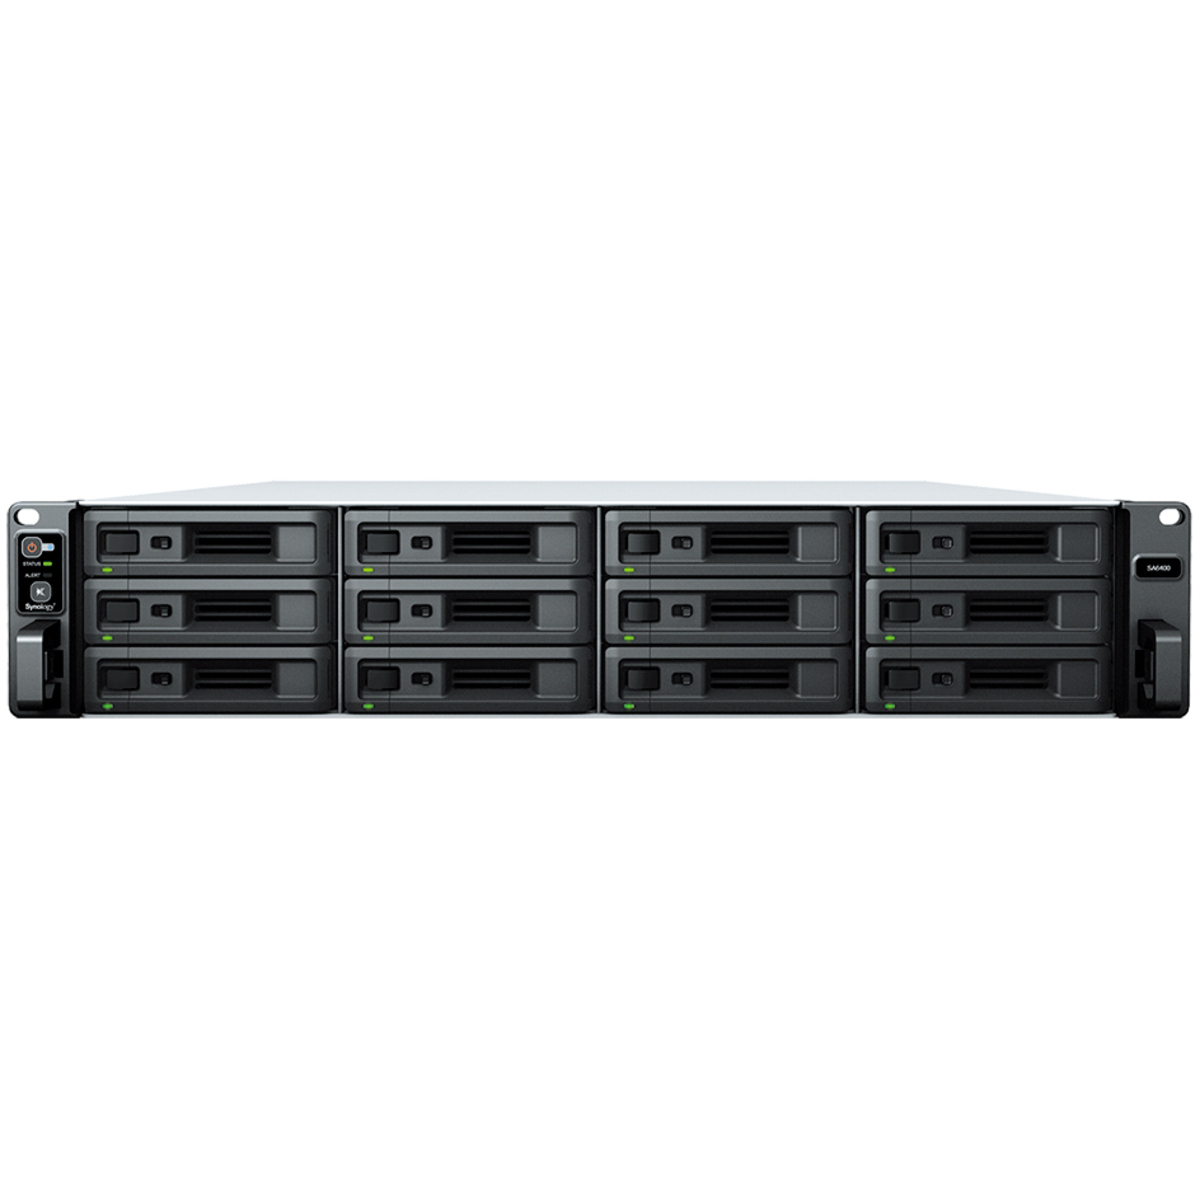 Synology RackStation SA6400 72tb 12-Bay RackMount Large Business / Enterprise NAS - Network Attached Storage Device 9x8tb Seagate EXOS 7E10 ST8000NM017B 3.5 7200rpm SATA 6Gb/s HDD ENTERPRISE Class Drives Installed - Burn-In Tested RackStation SA6400